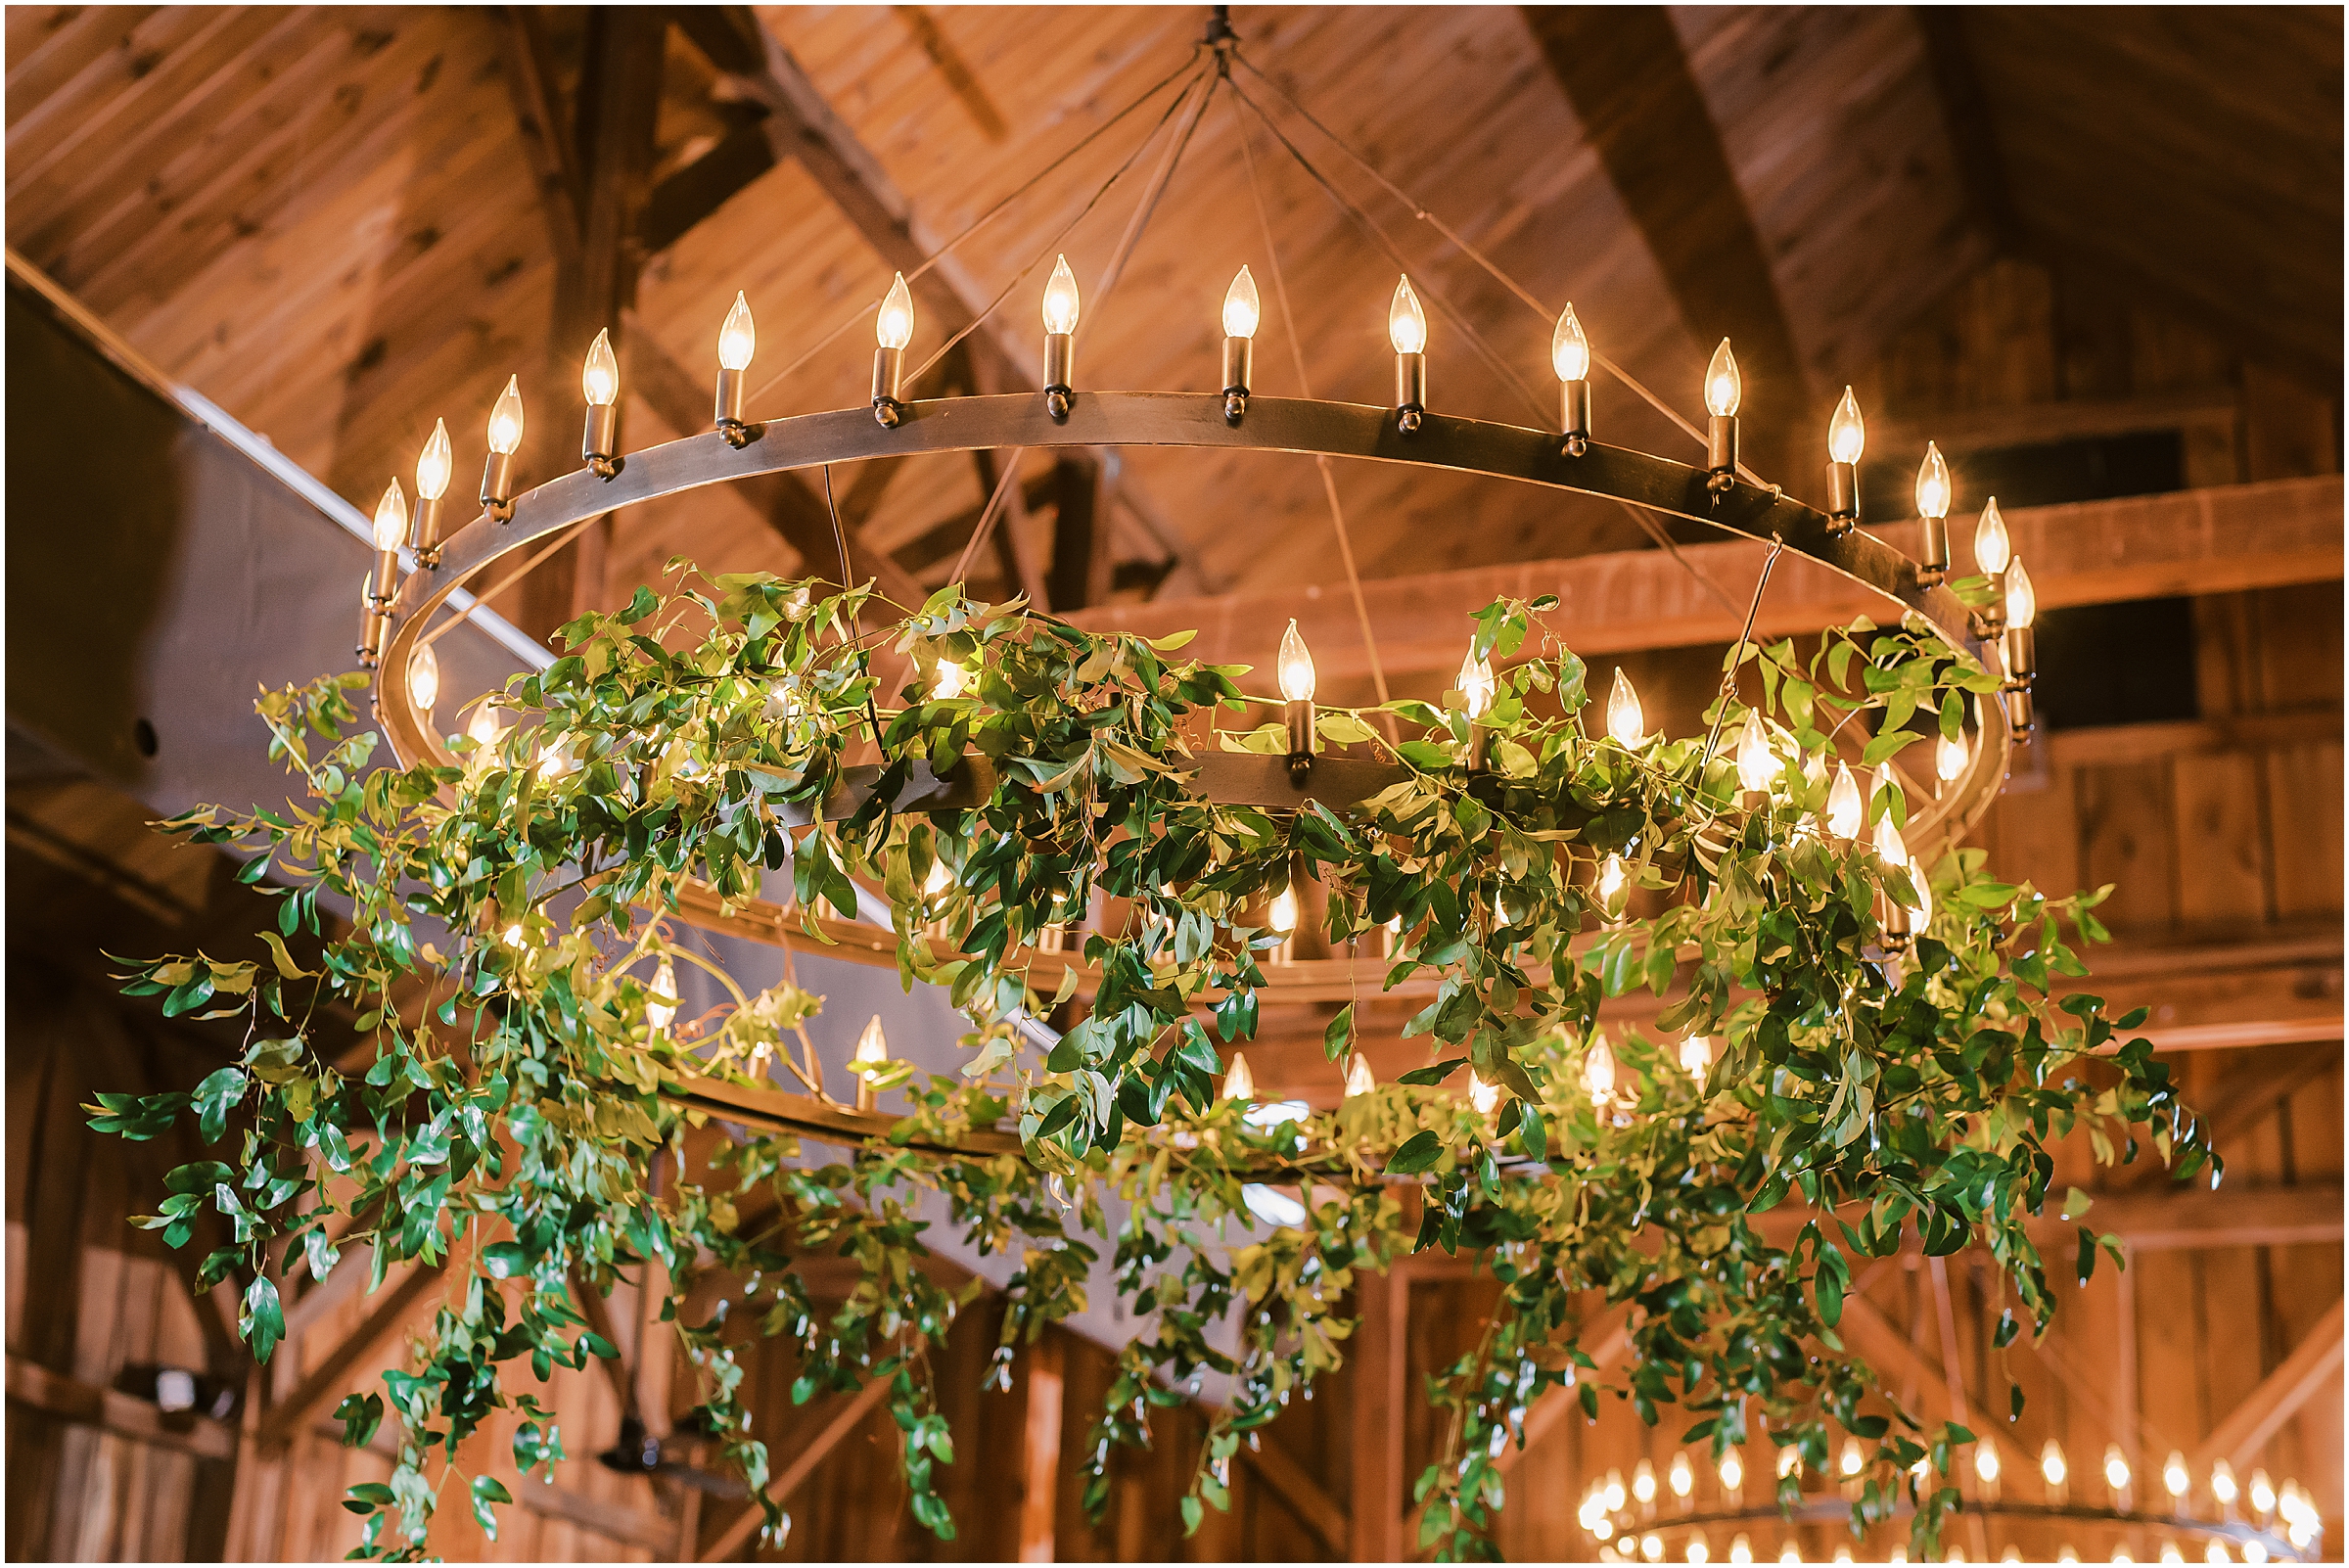 Chandelier draped with greenery at Tranquility Farm